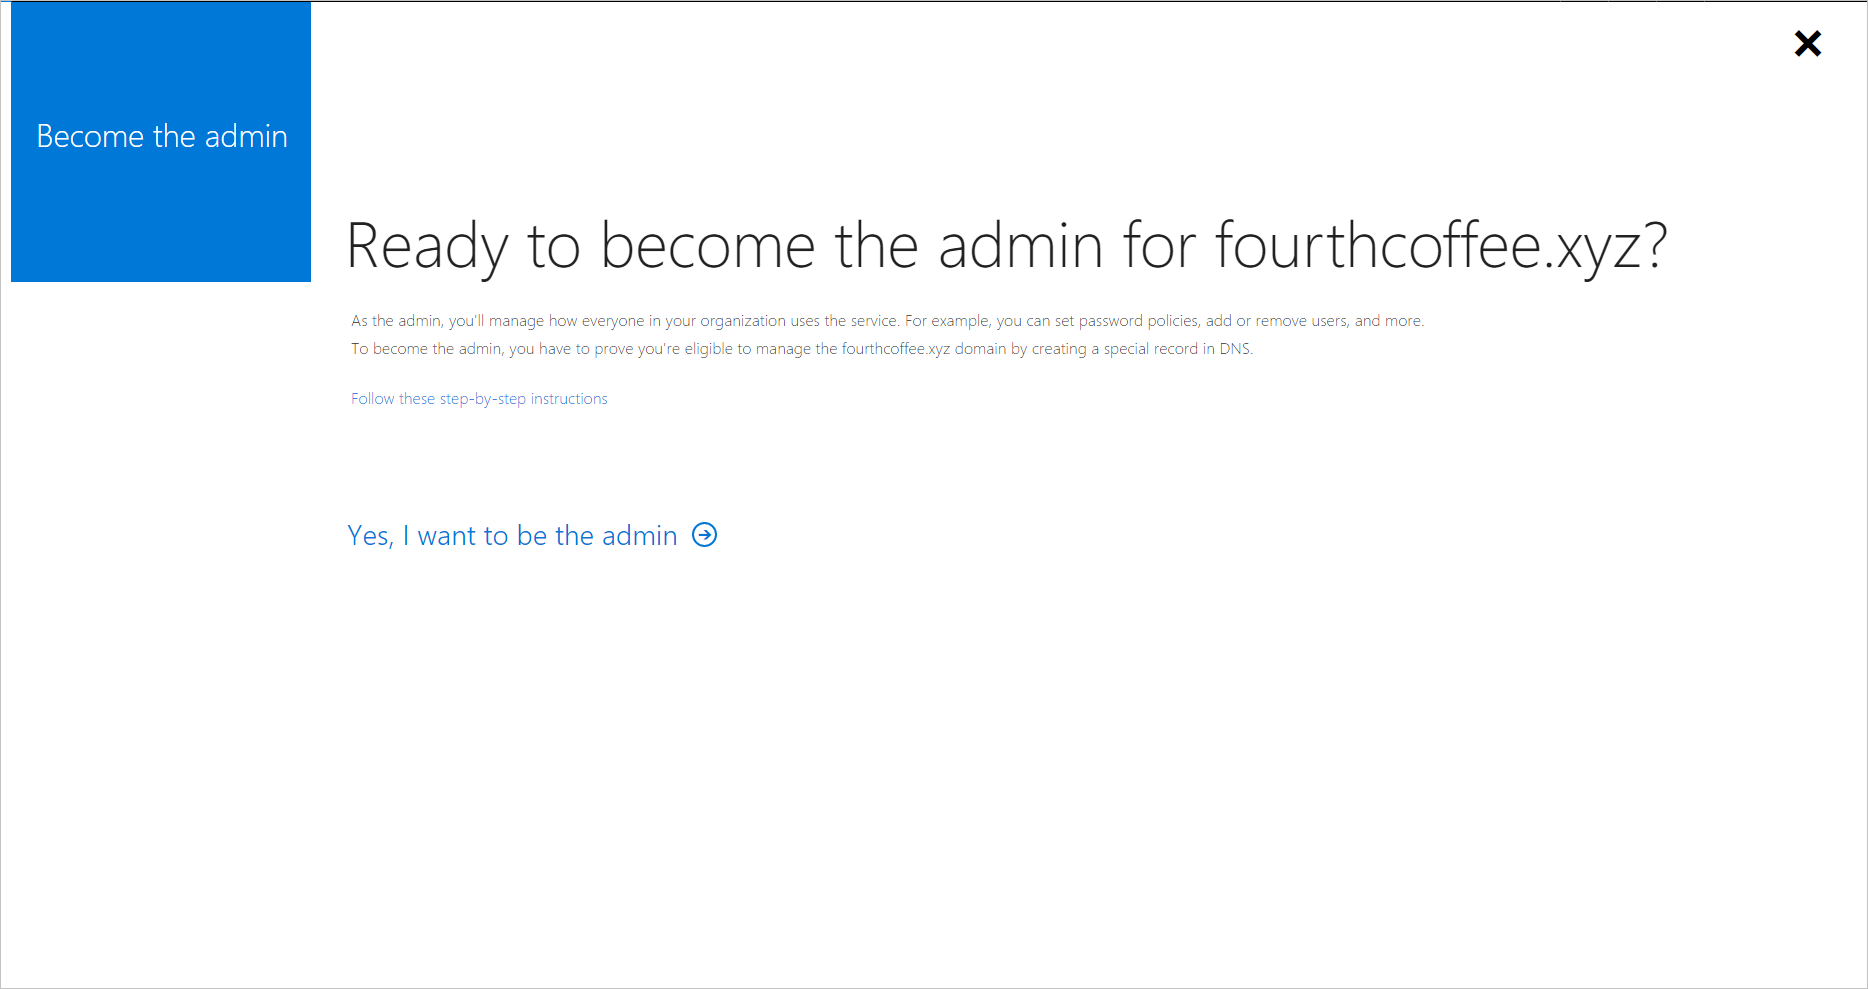 Screenshot for Become the Admin.